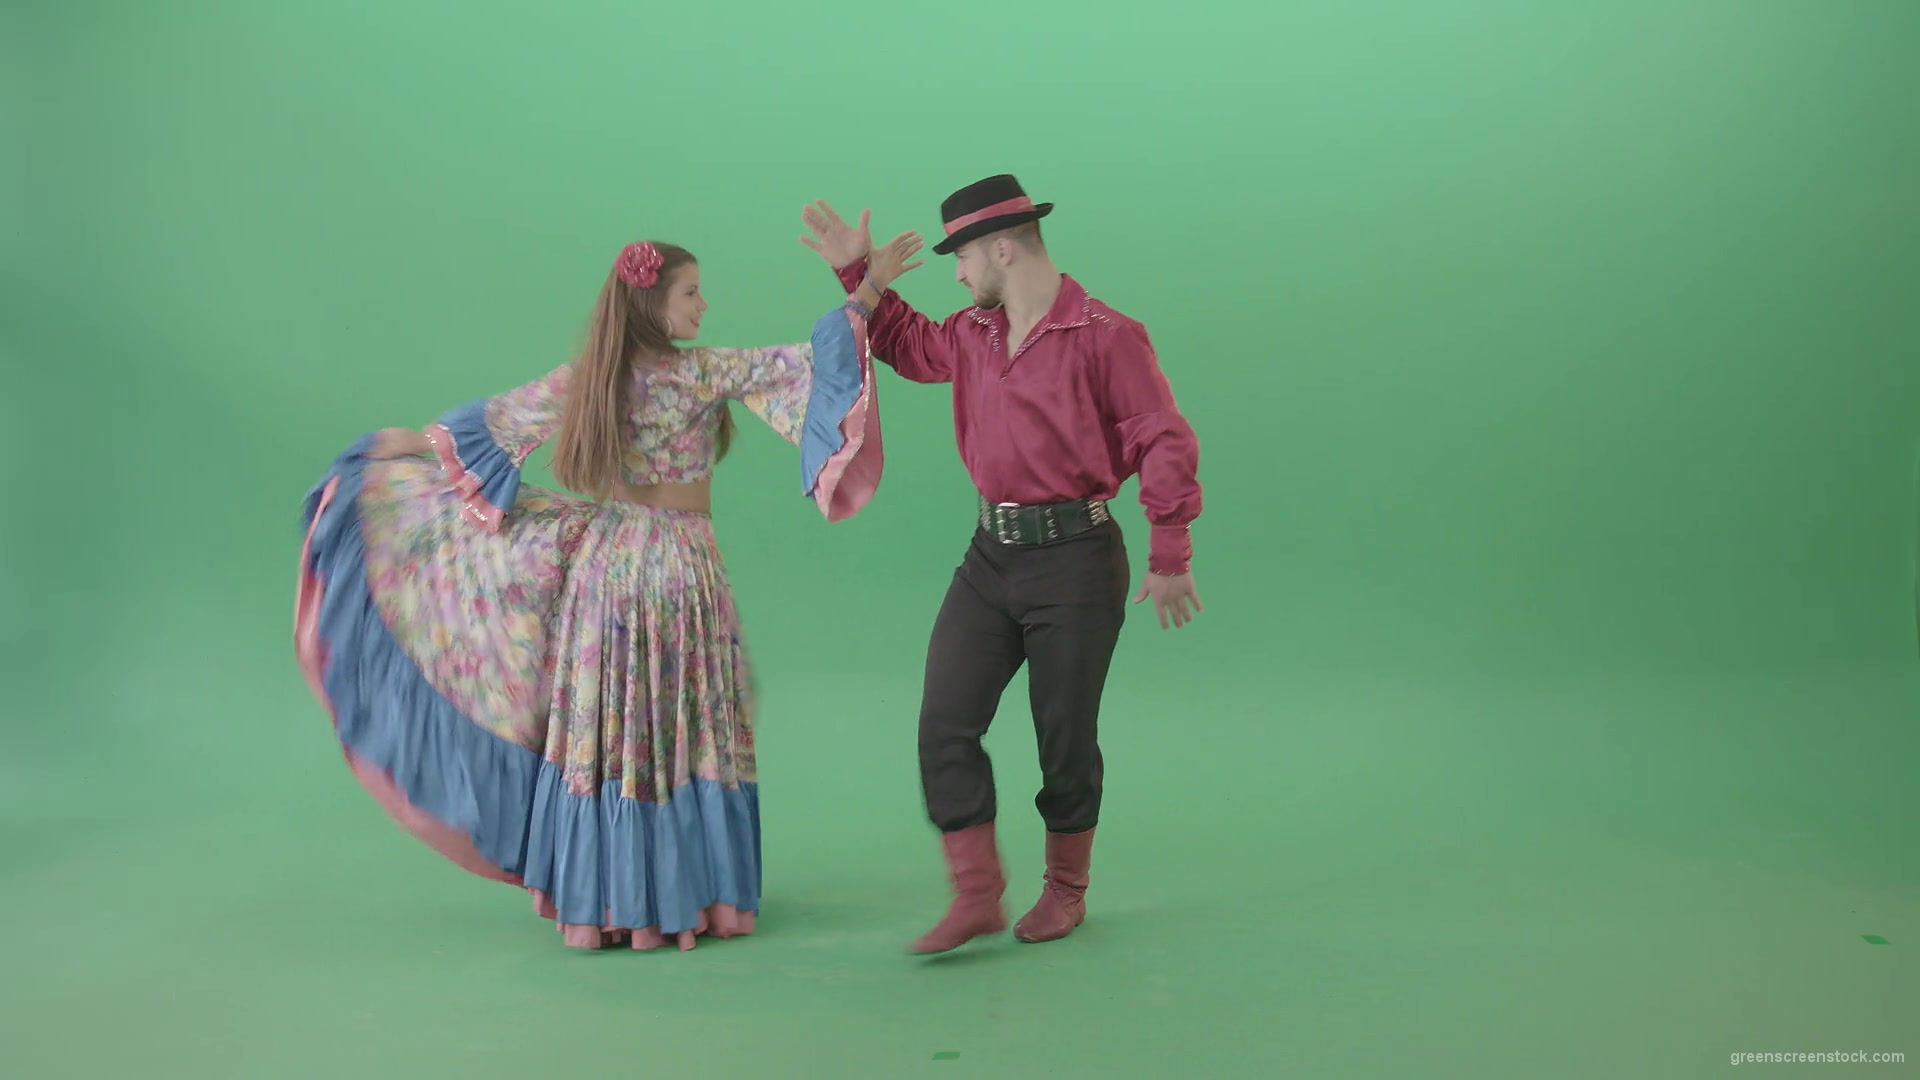 Folk-national-romania-dance-by-gypsy-tzigane-couple-isolated-on-green-screen-4K-video-footage-1920_002 Green Screen Stock